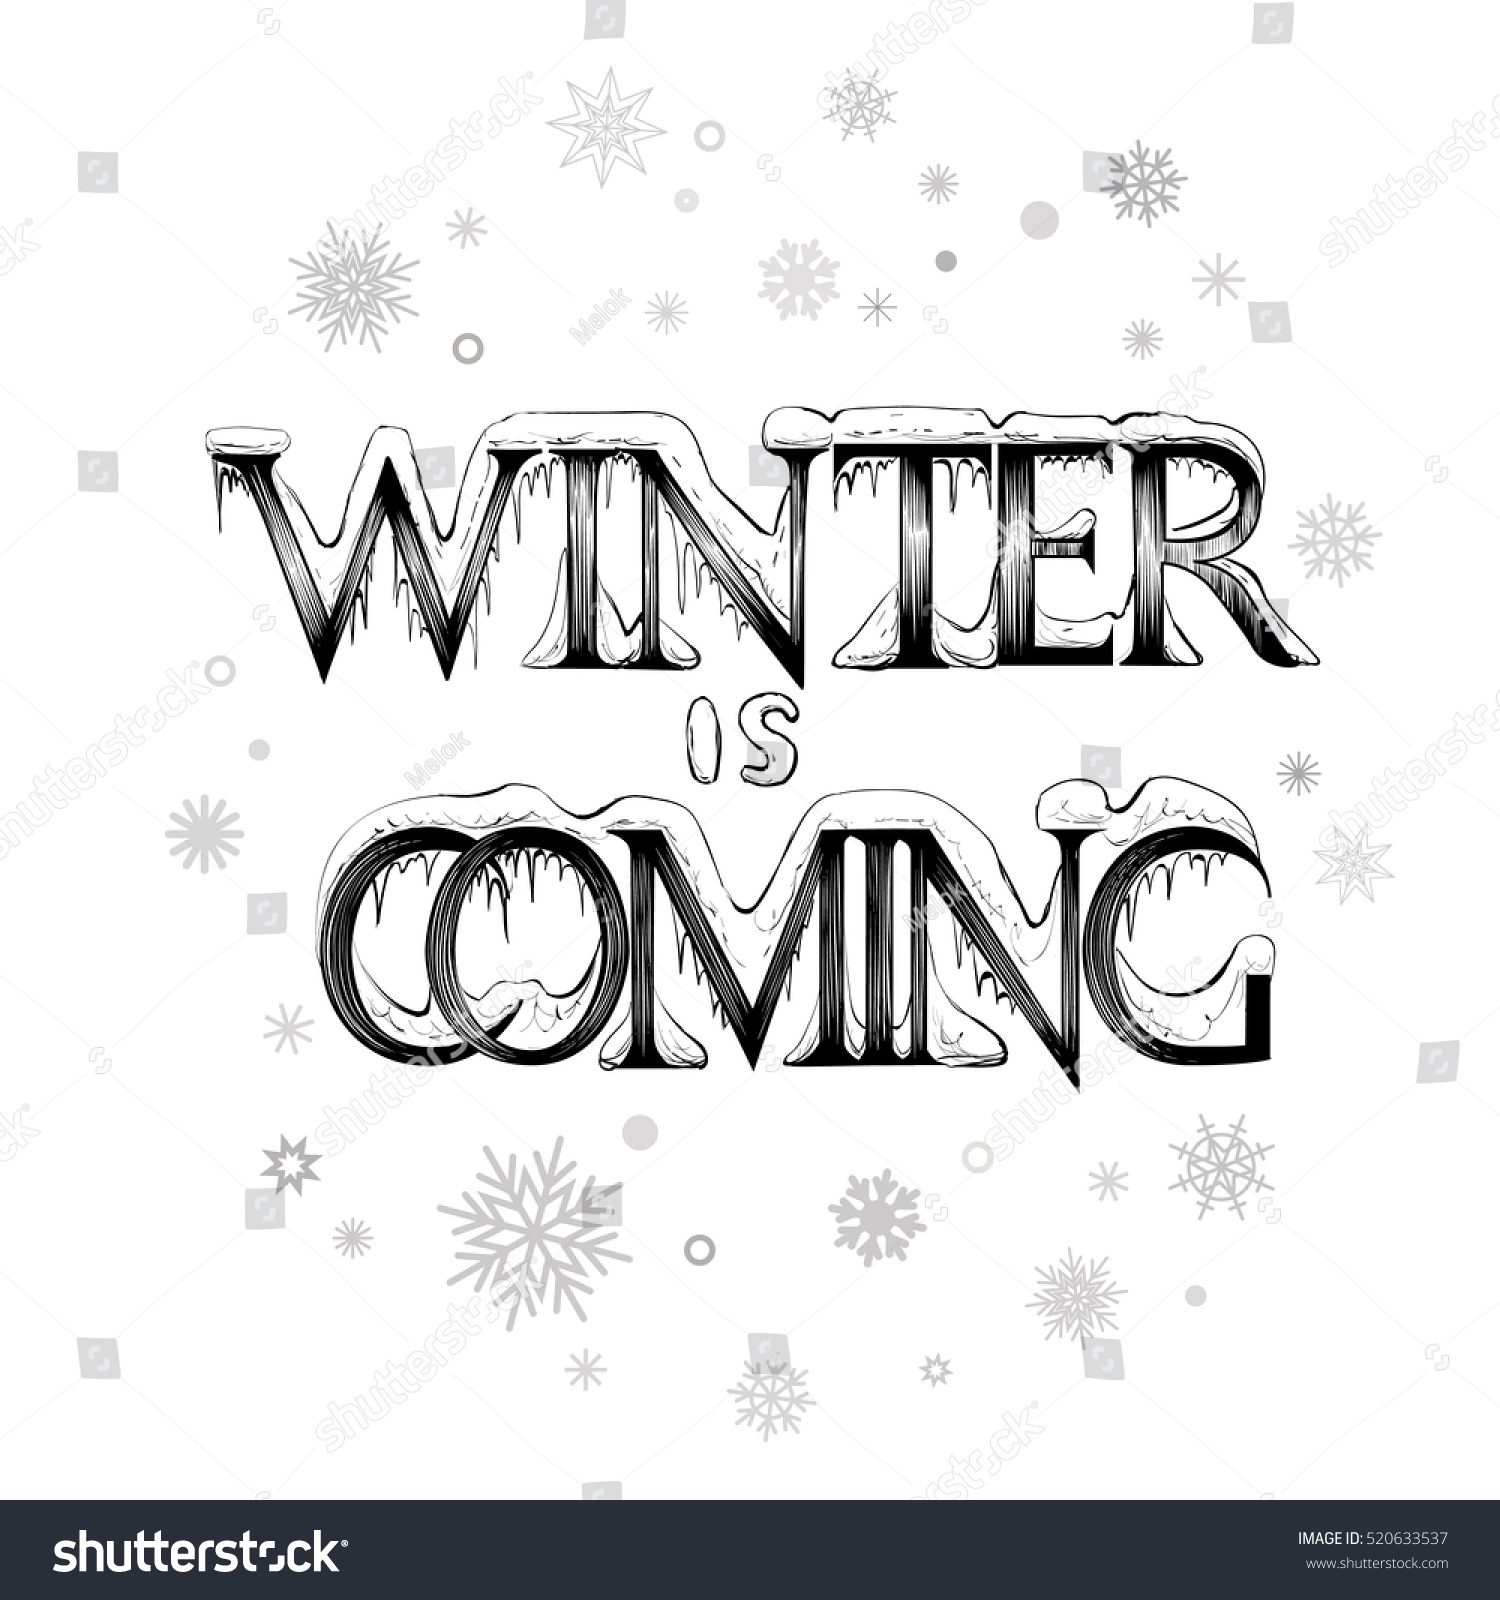 Download Winter Coming Vector Lettering Snowflakes Text Stock Vector 520633537 - Shutterstock